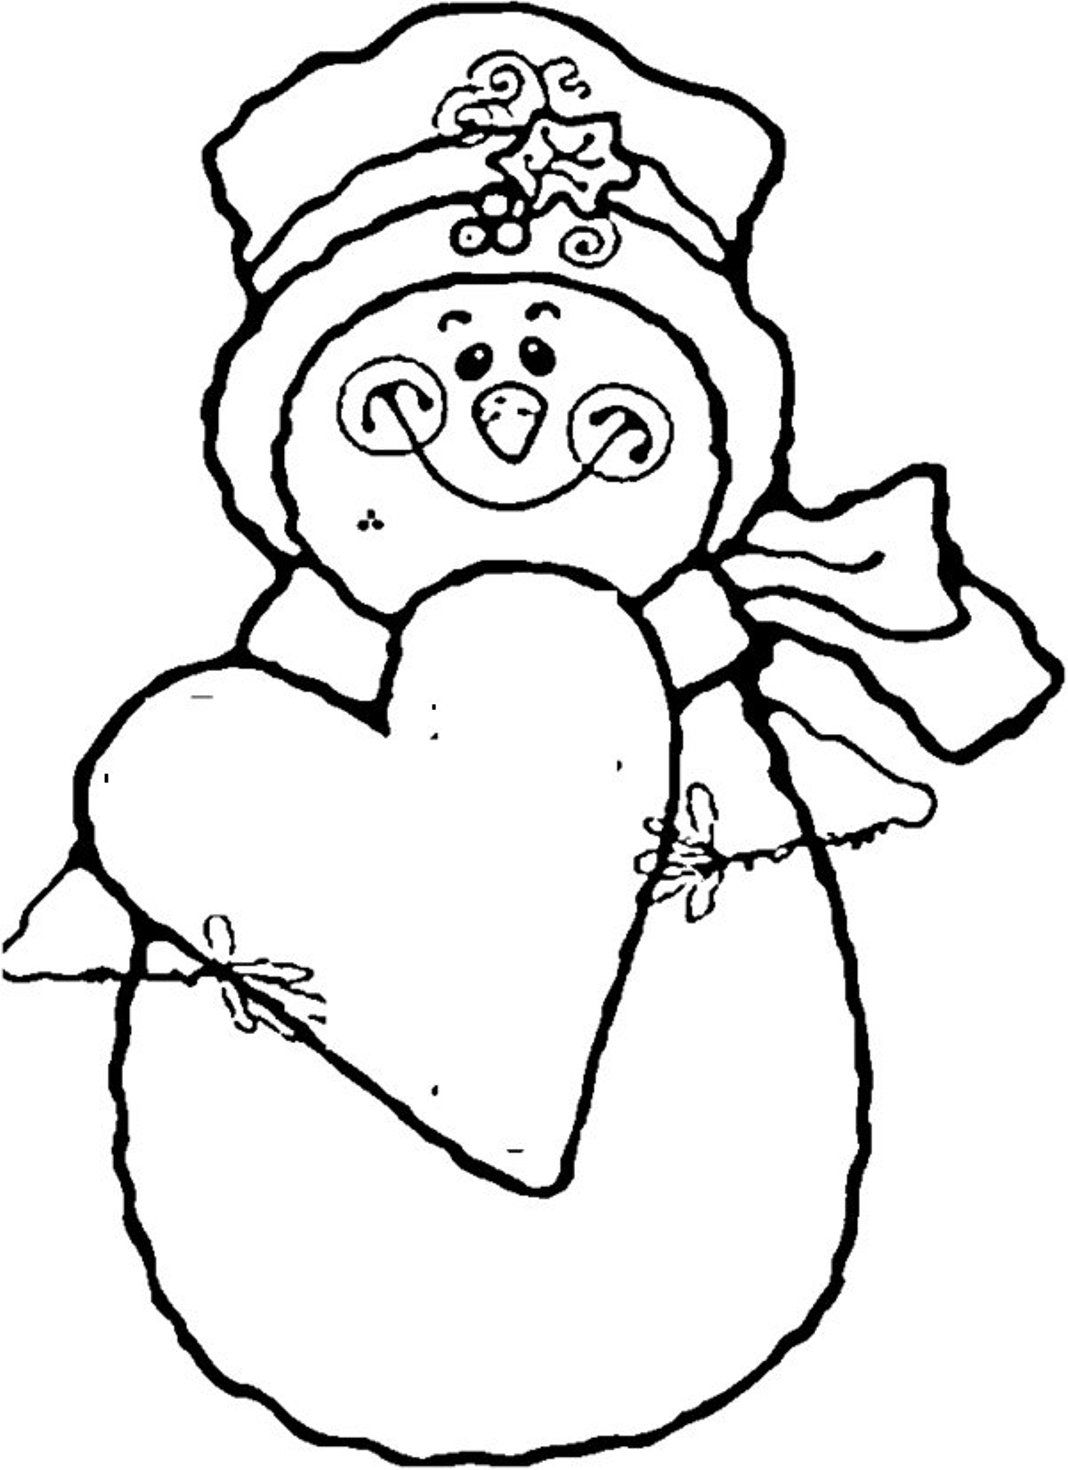 Snowman Coloring Sheets : Free Snowman Kid Coloring Pages ...